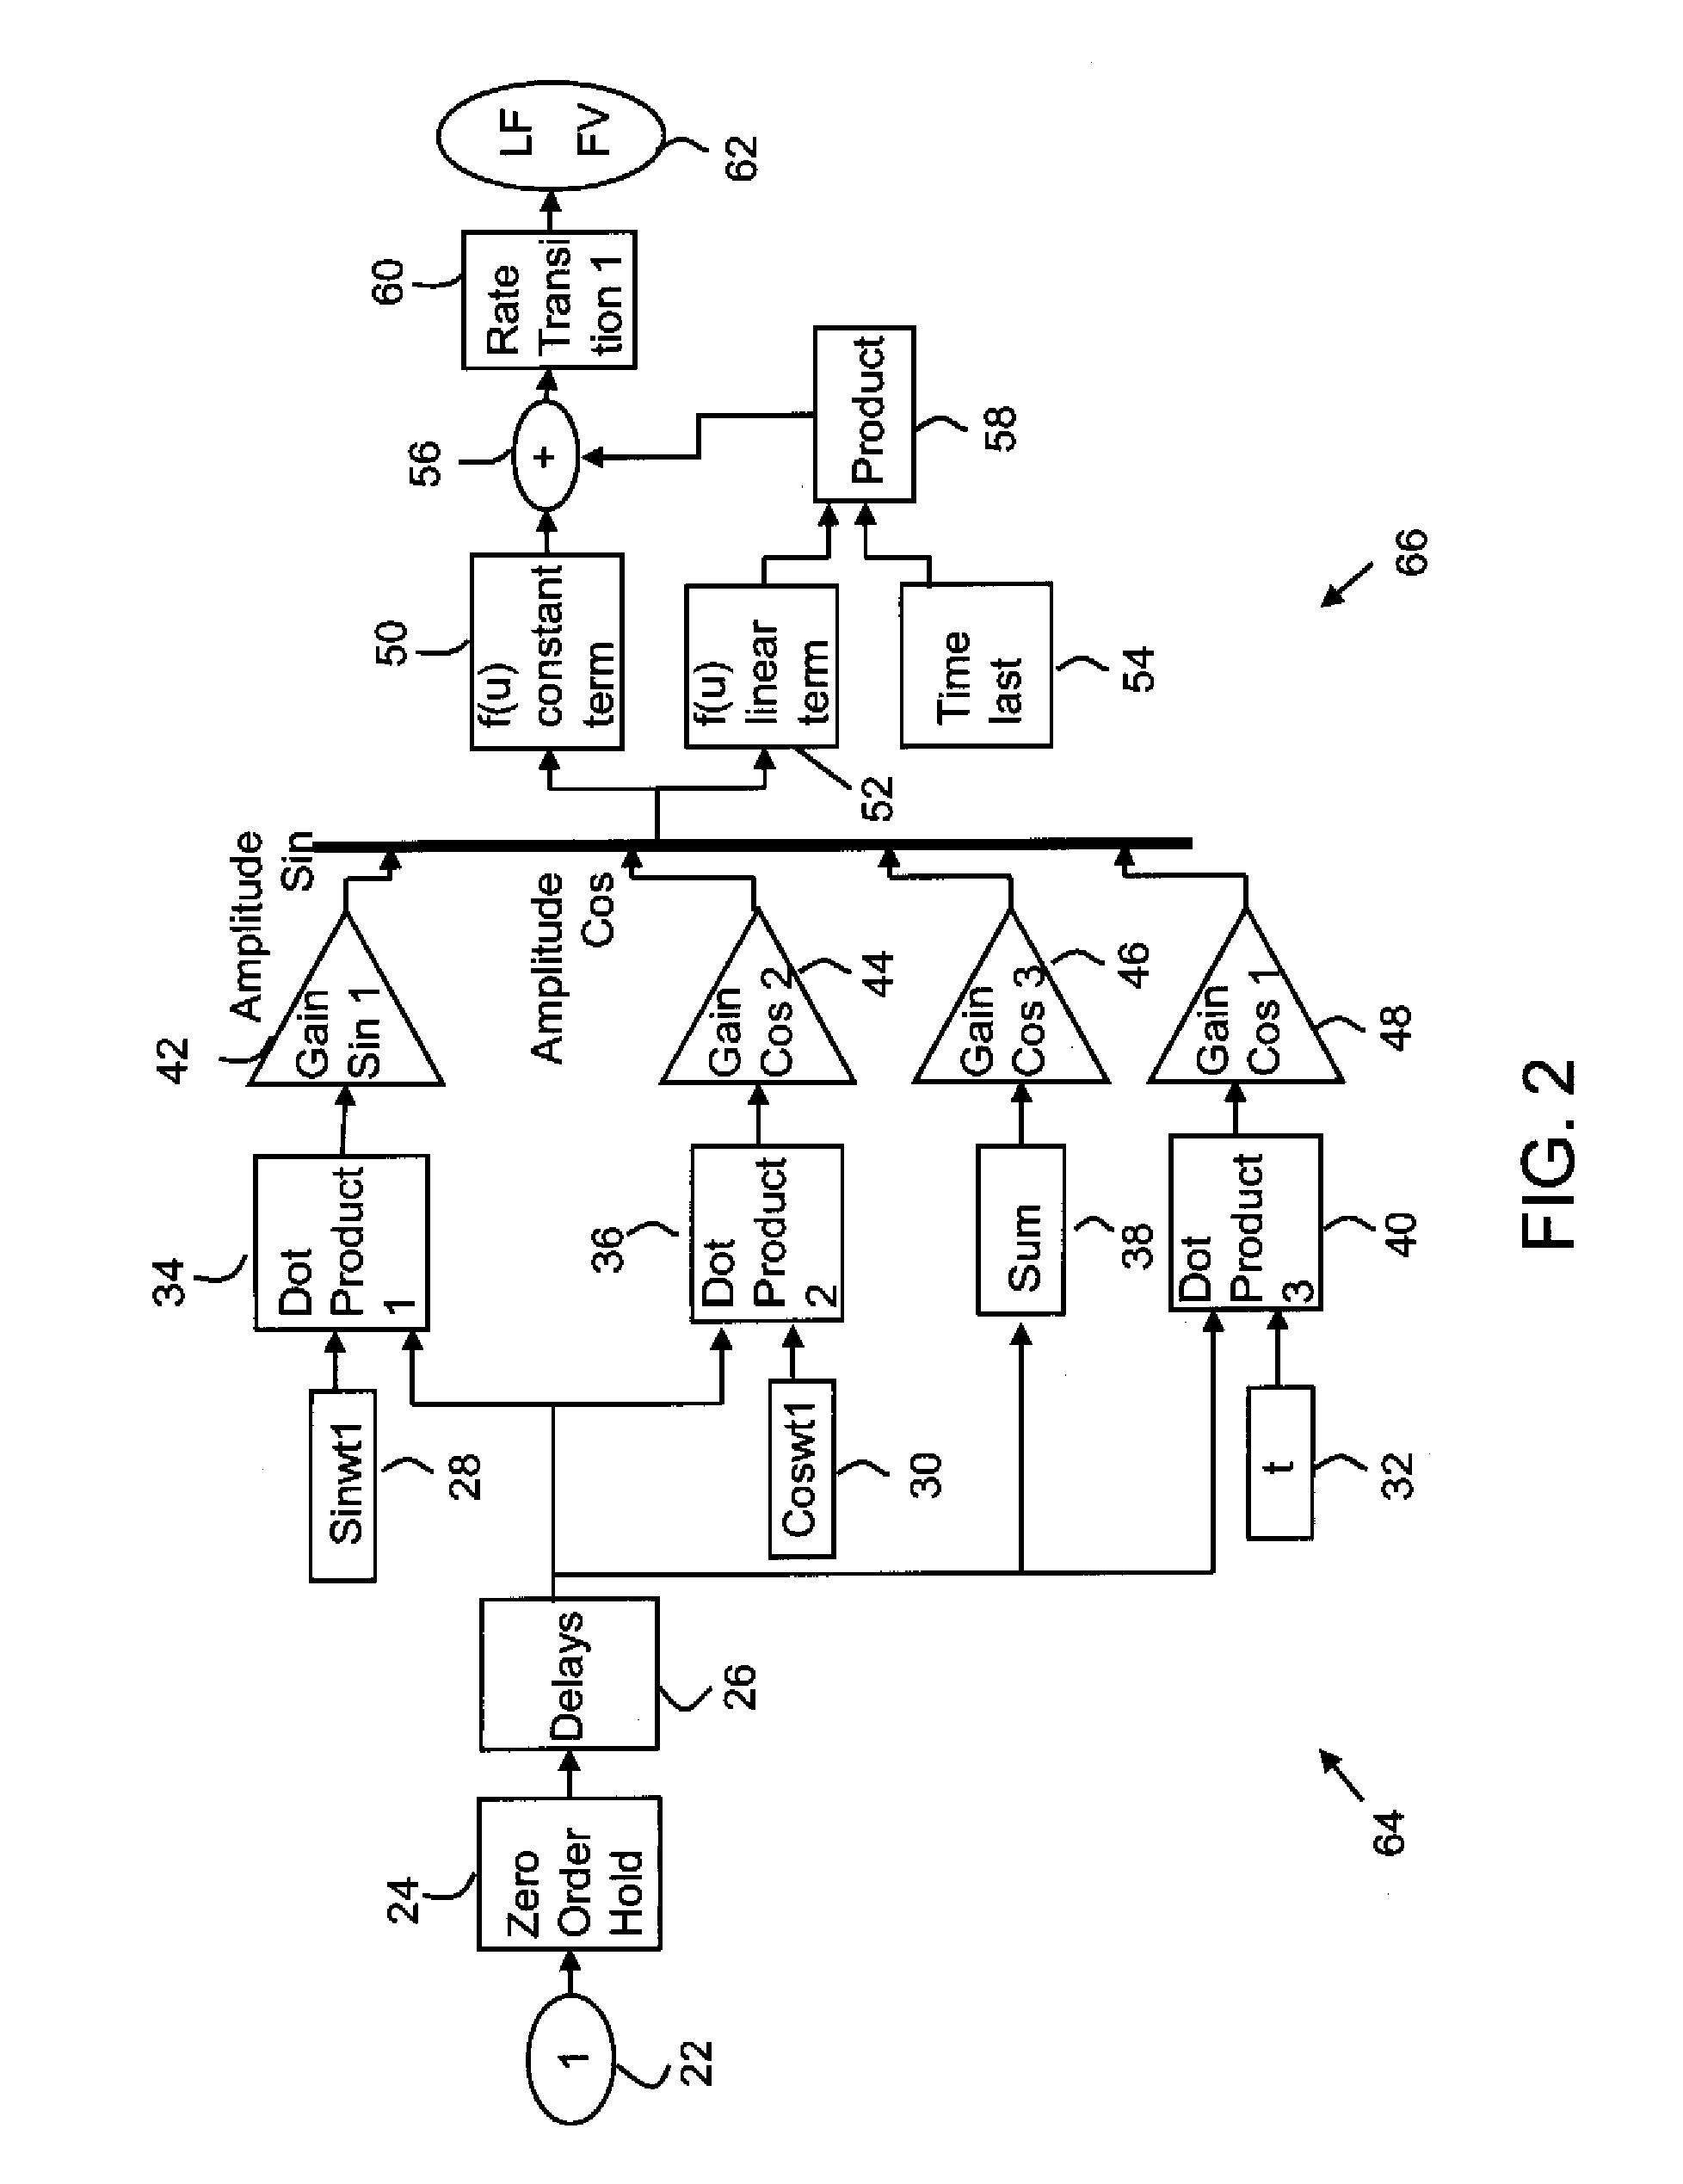 Nonlinear frequency dependent filtering for vehicle ride/stability control